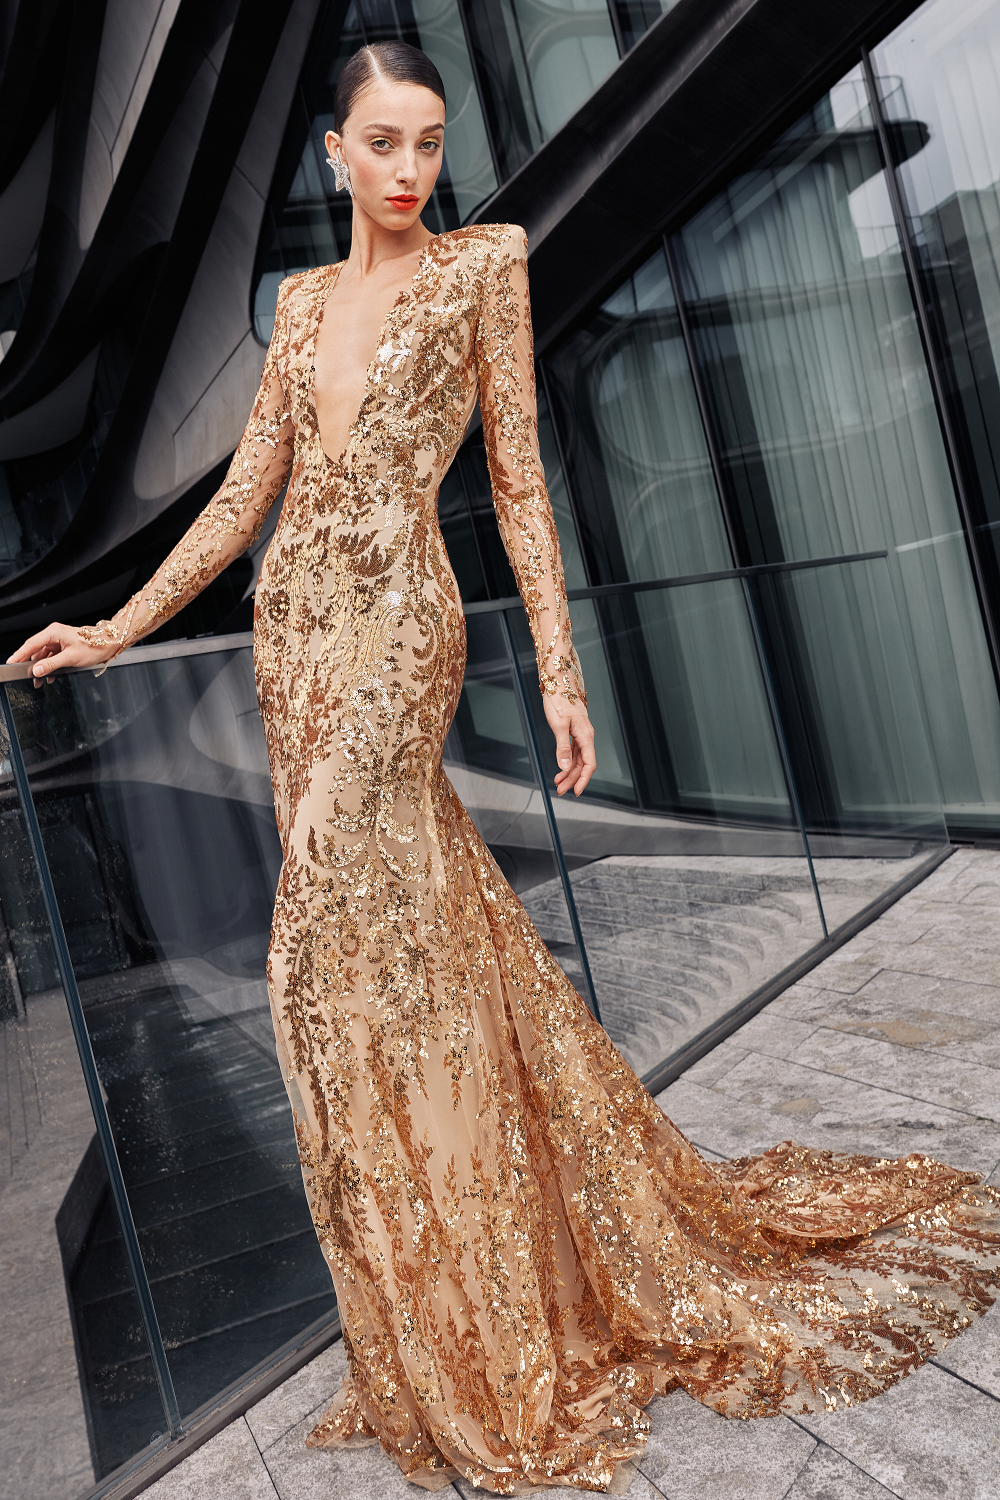 The Best Gold Wedding Dresses, From Elegant to Bold